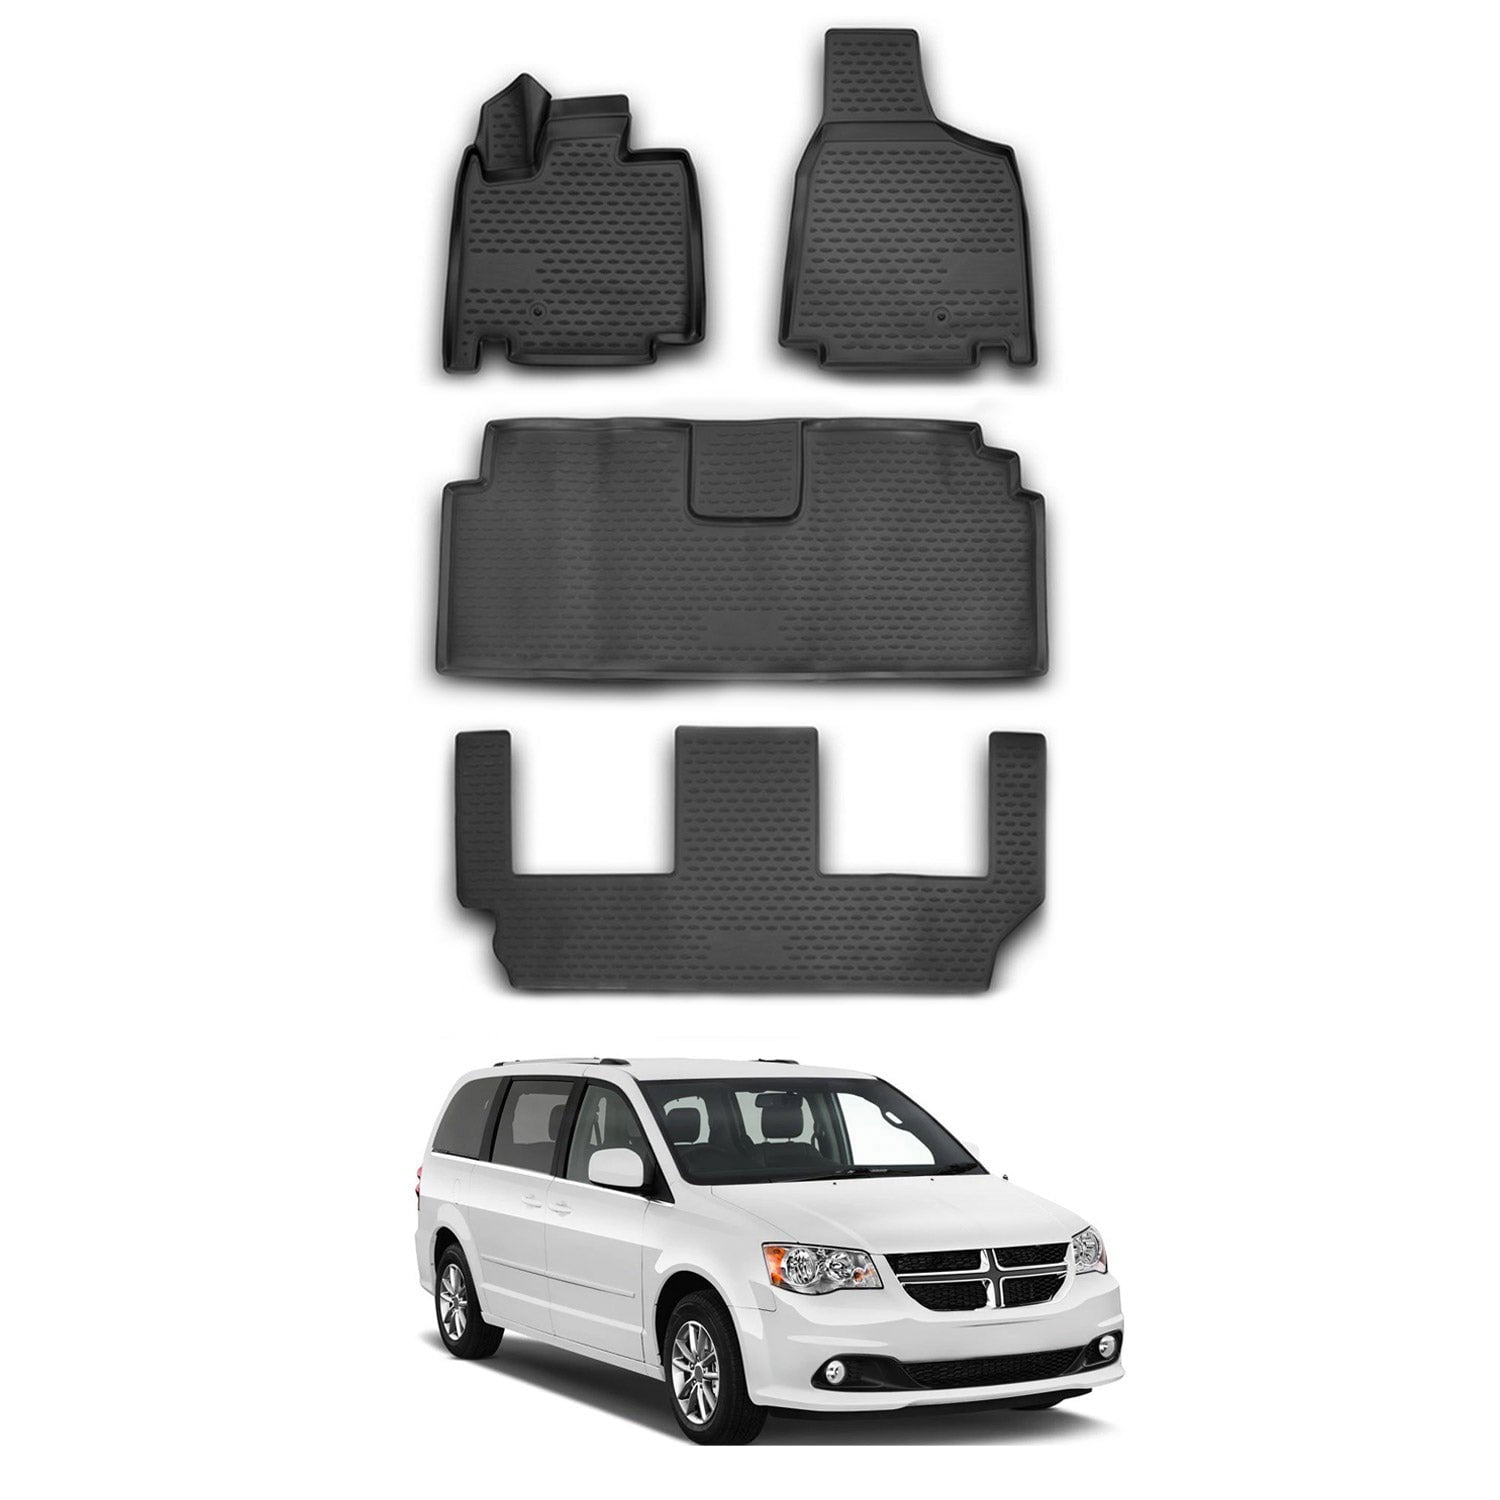 DODGE RAM ALL YEARS 5 Piece Heavy Duty Rubber MPV Taxi Style Floor Mat Set 